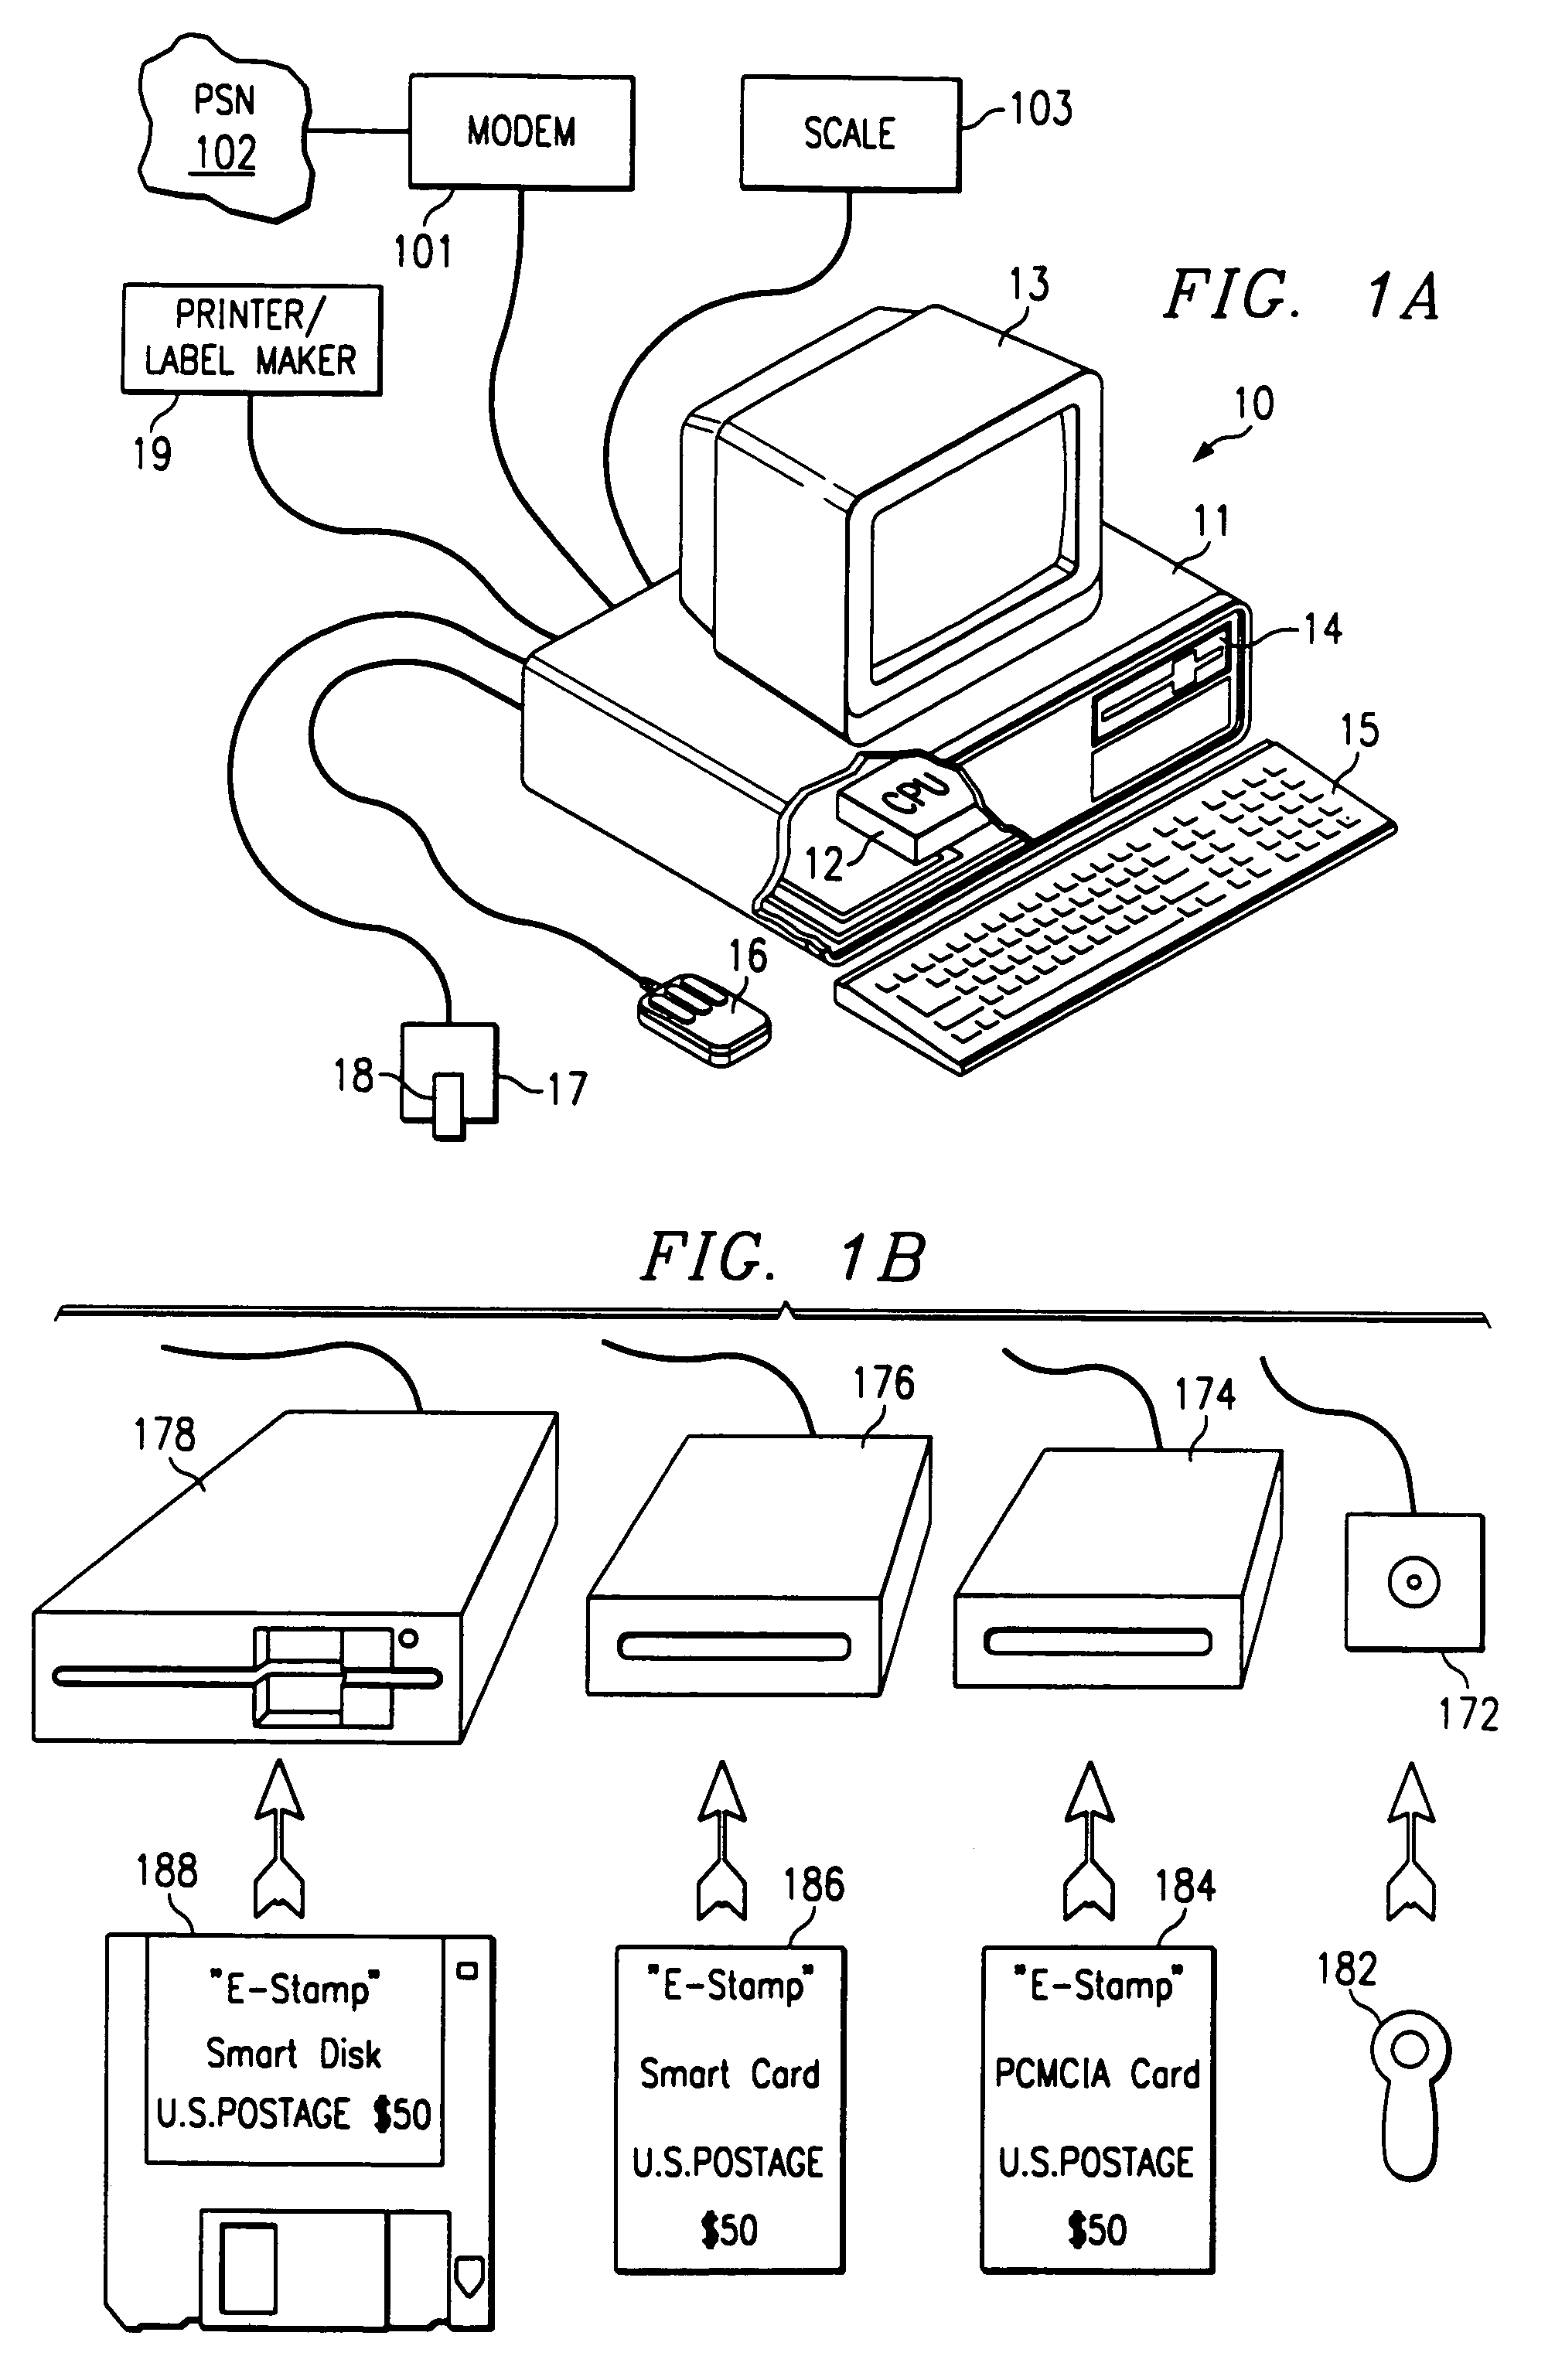 System and method for automatically providing shipping/transportation fees